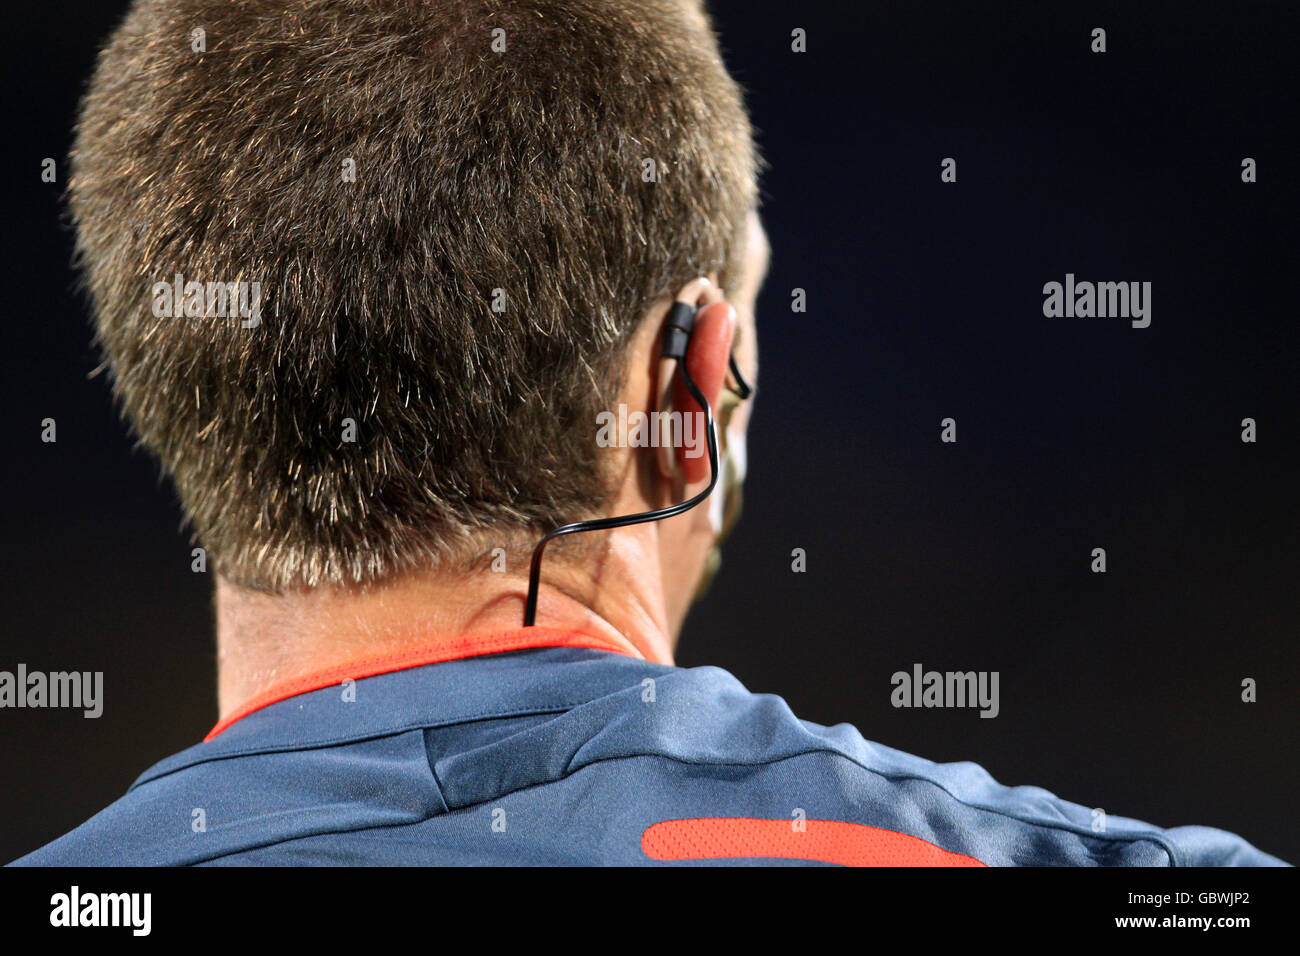 A general view of detail of ear piece technology used by Fifa referees Stock Photo